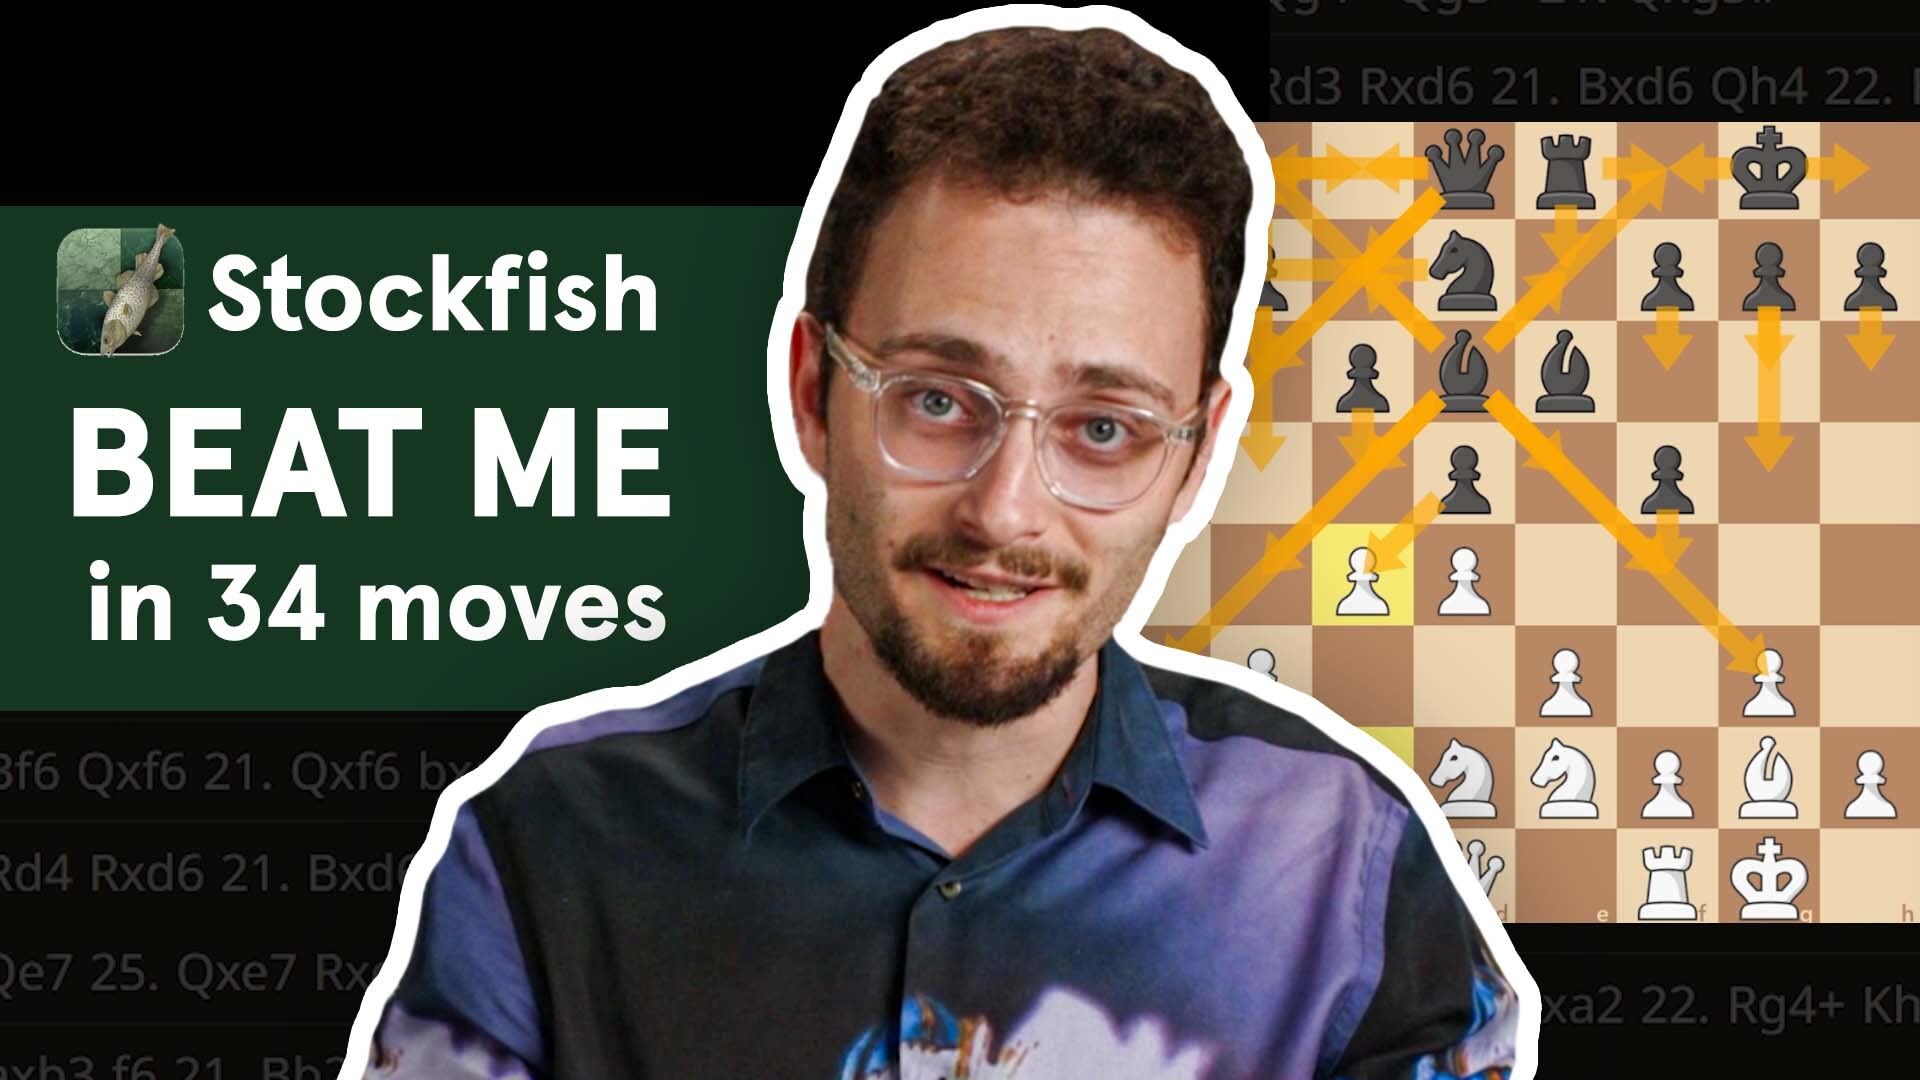 Opening Theory Archives - British Chess News